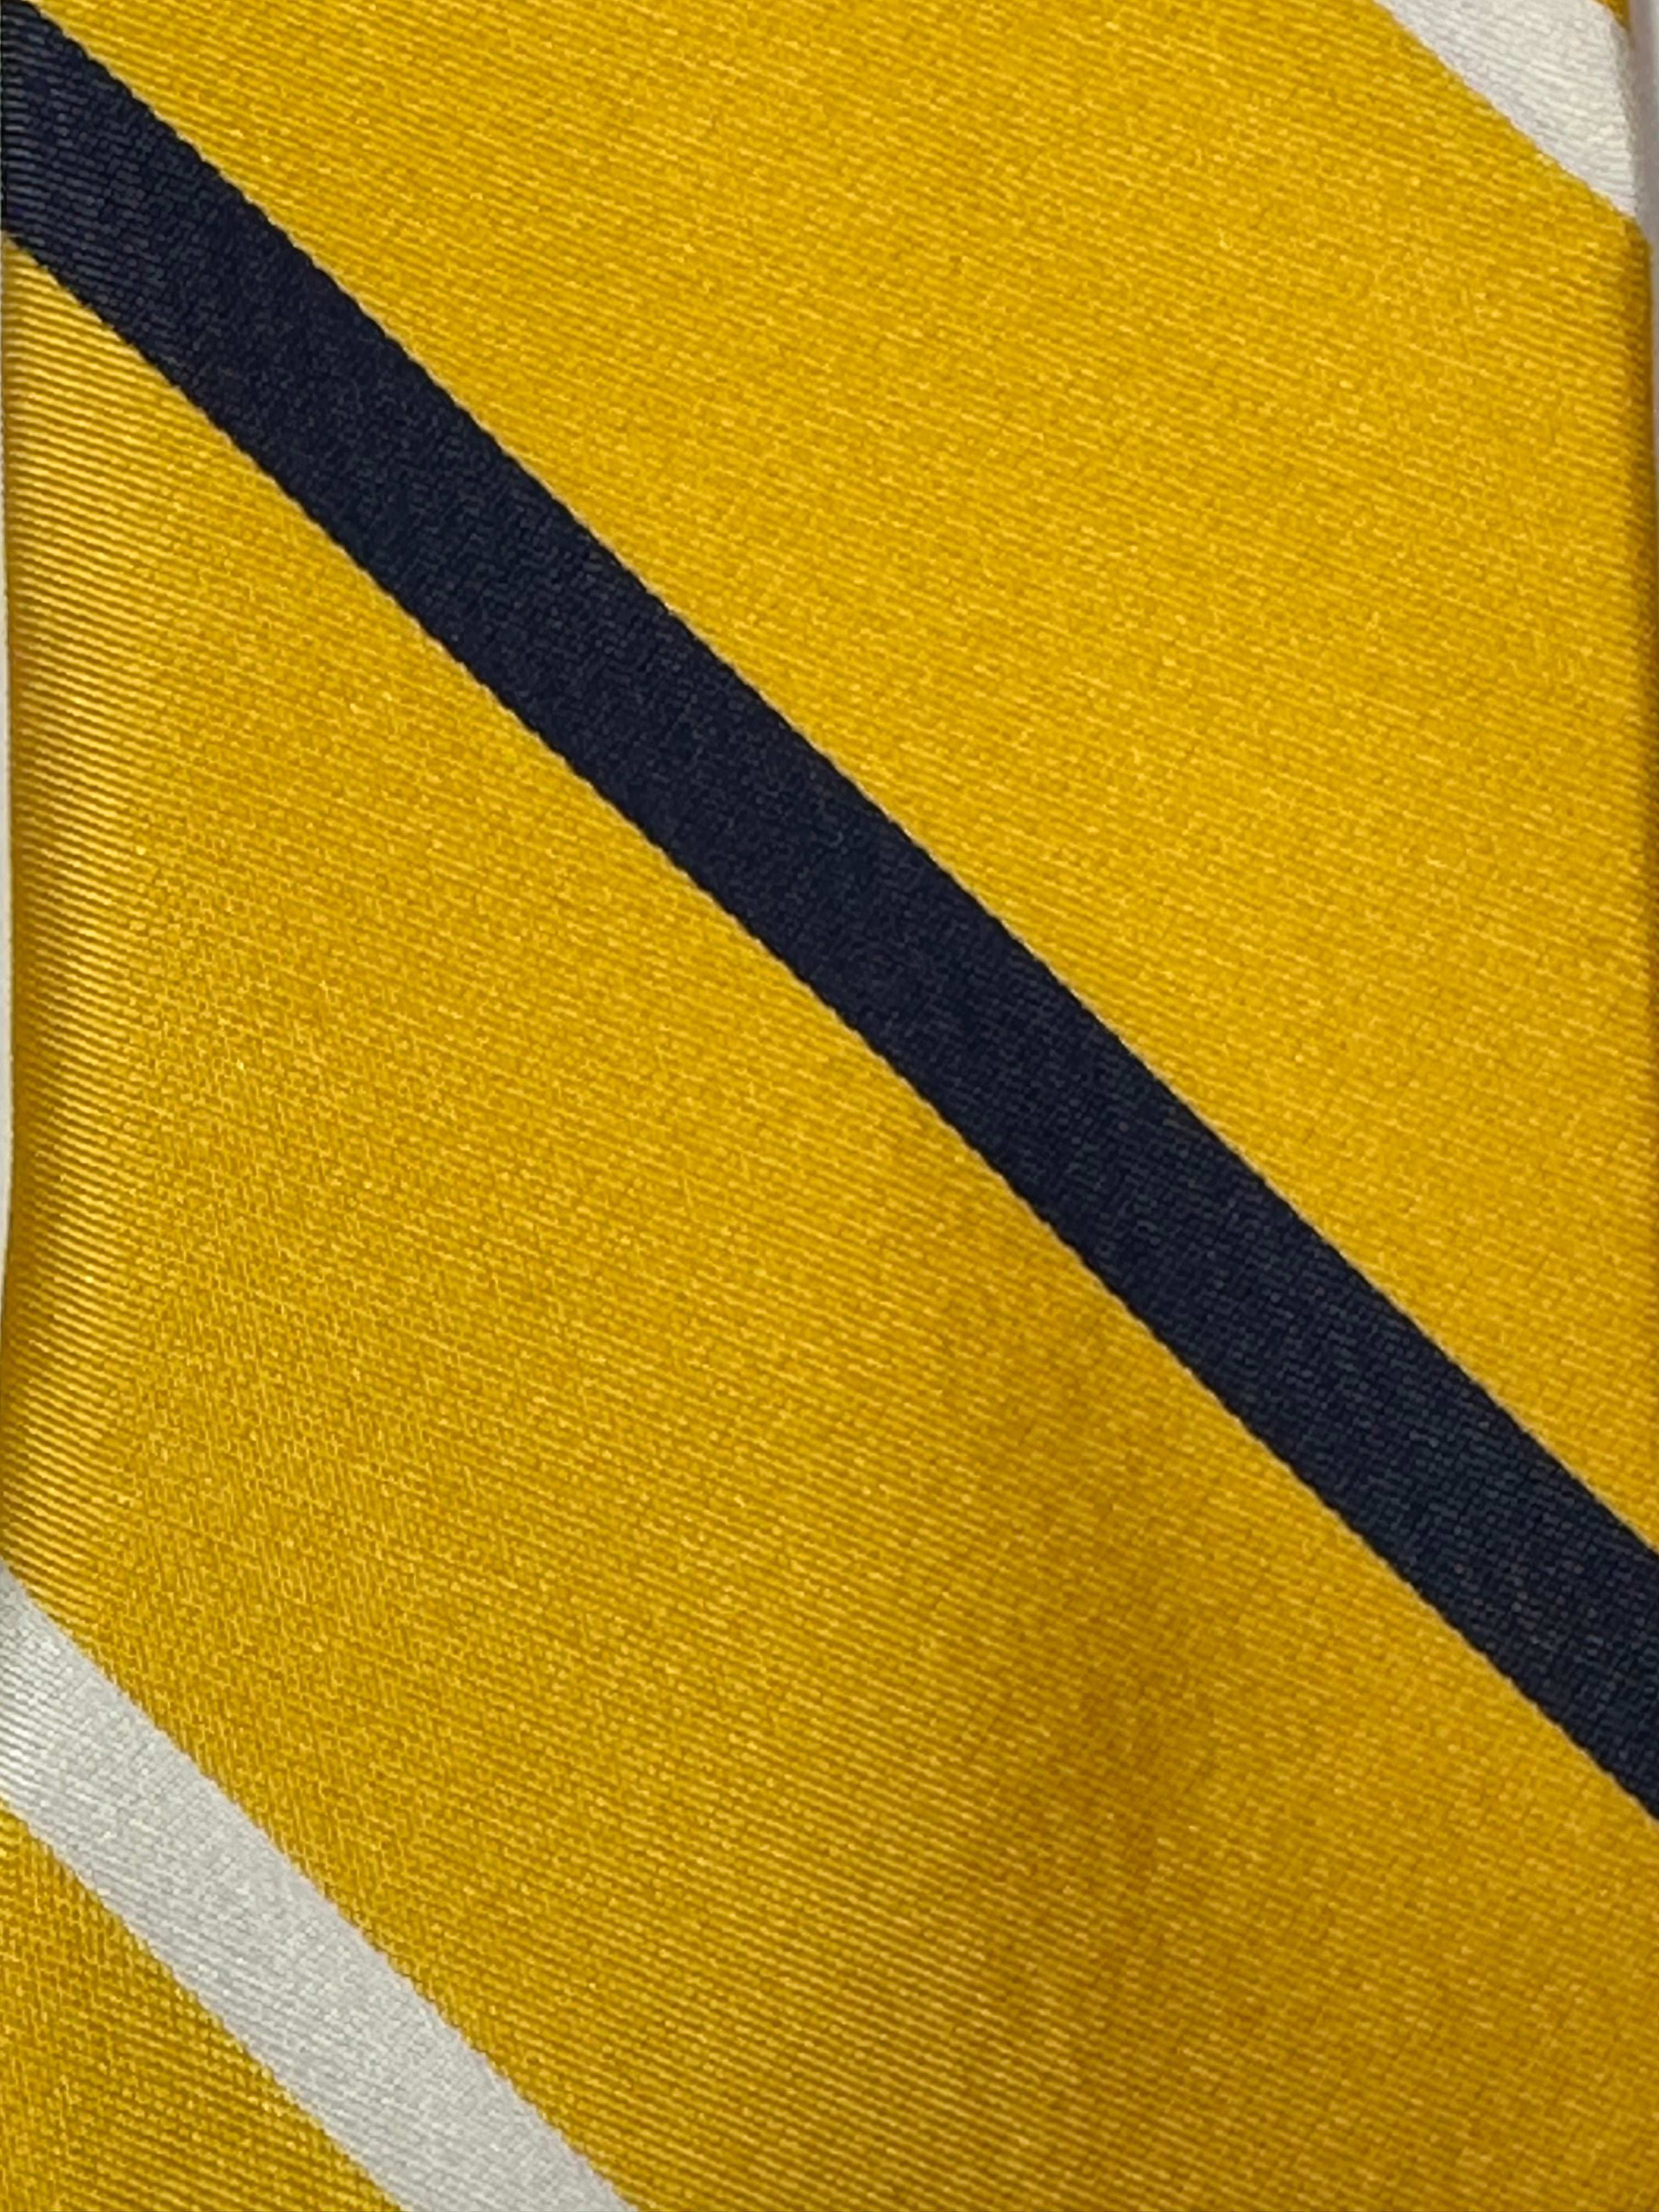 Royal and Gold Stripe Tie